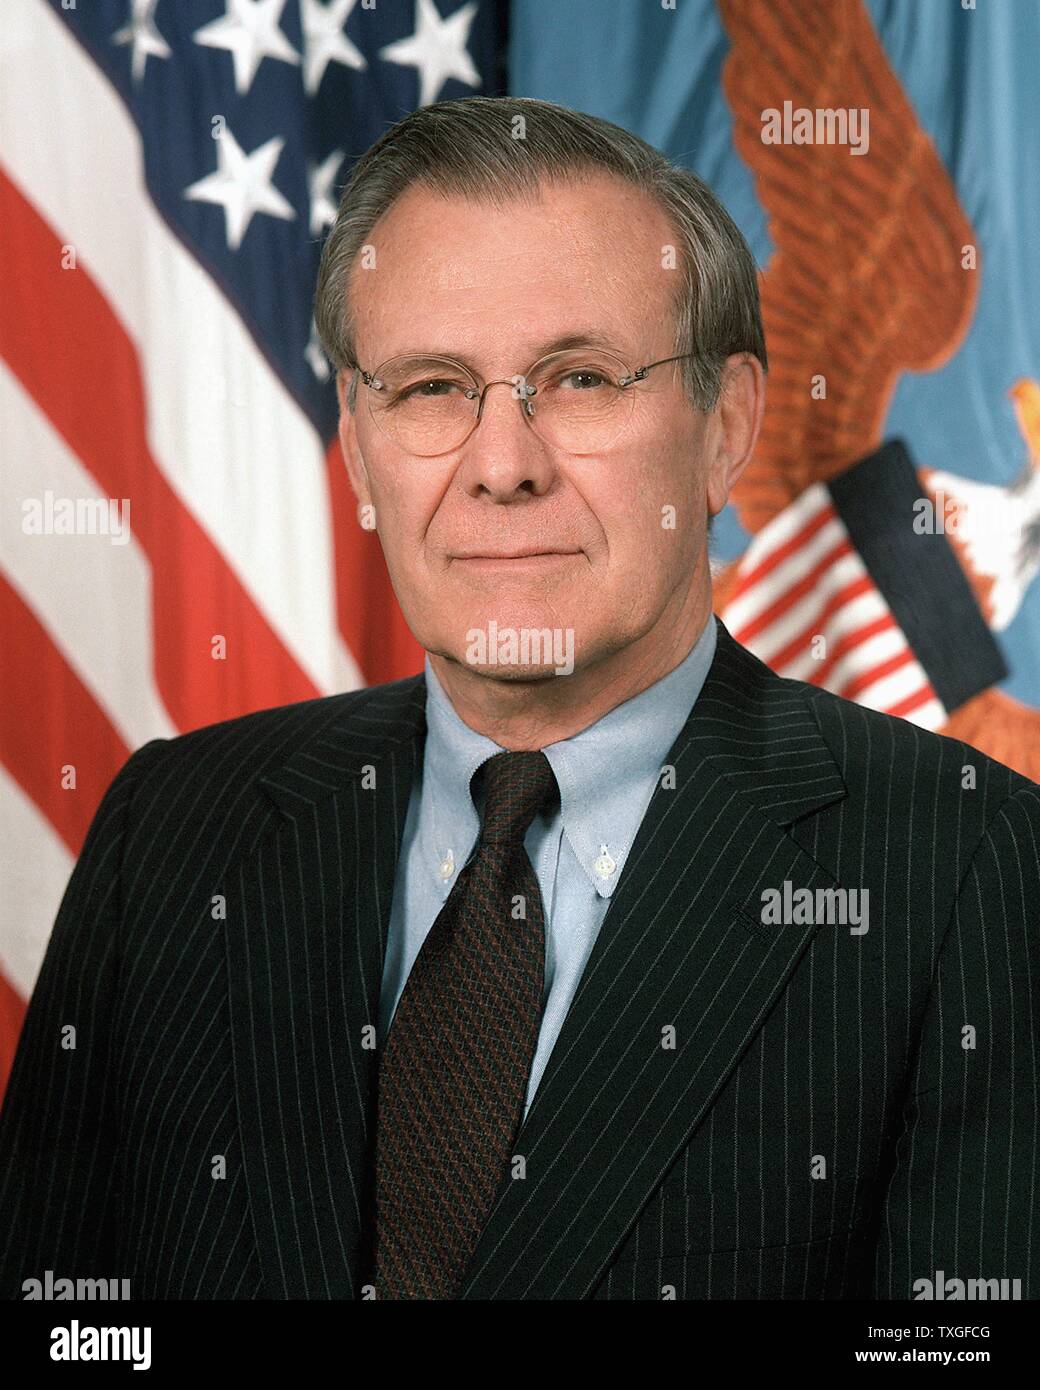 Donald Rumsfeld (born July 9, 1932) American politician and businessman. Secretary of Defense from 1975 to 1977 and 2001 to 2006 under President George W. Bush. U.S. Congressman from Illinois (1962–1969), Counsellor to the President (1969–1973), the United States Permanent Representative to NATO (1973–1974), and White House Chief of Staff (1974–1975). Stock Photo